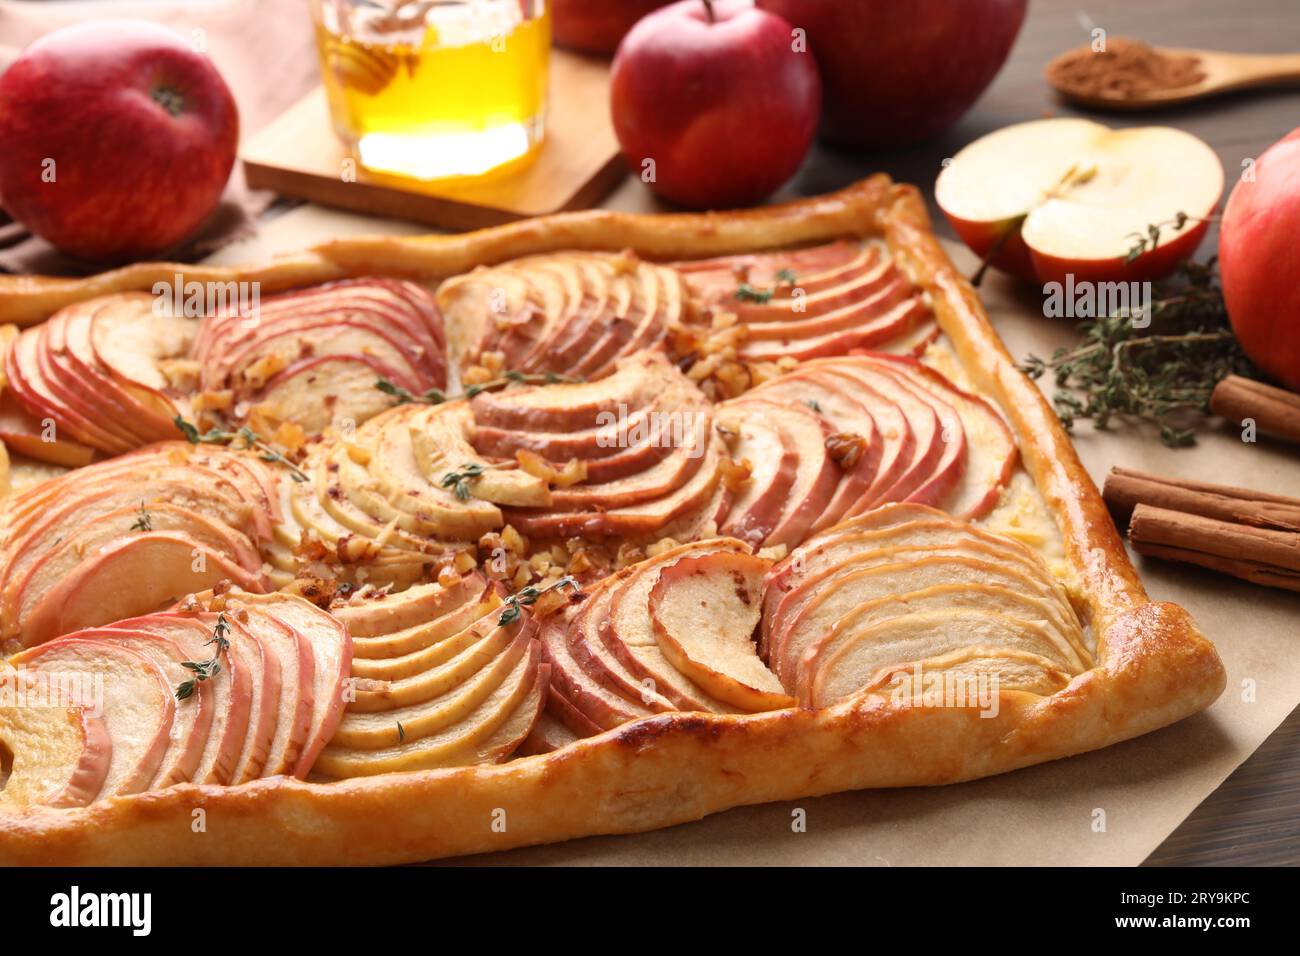 Freshly baked apple pie with nuts and ingredients on wooden table, closeup Stock Photo